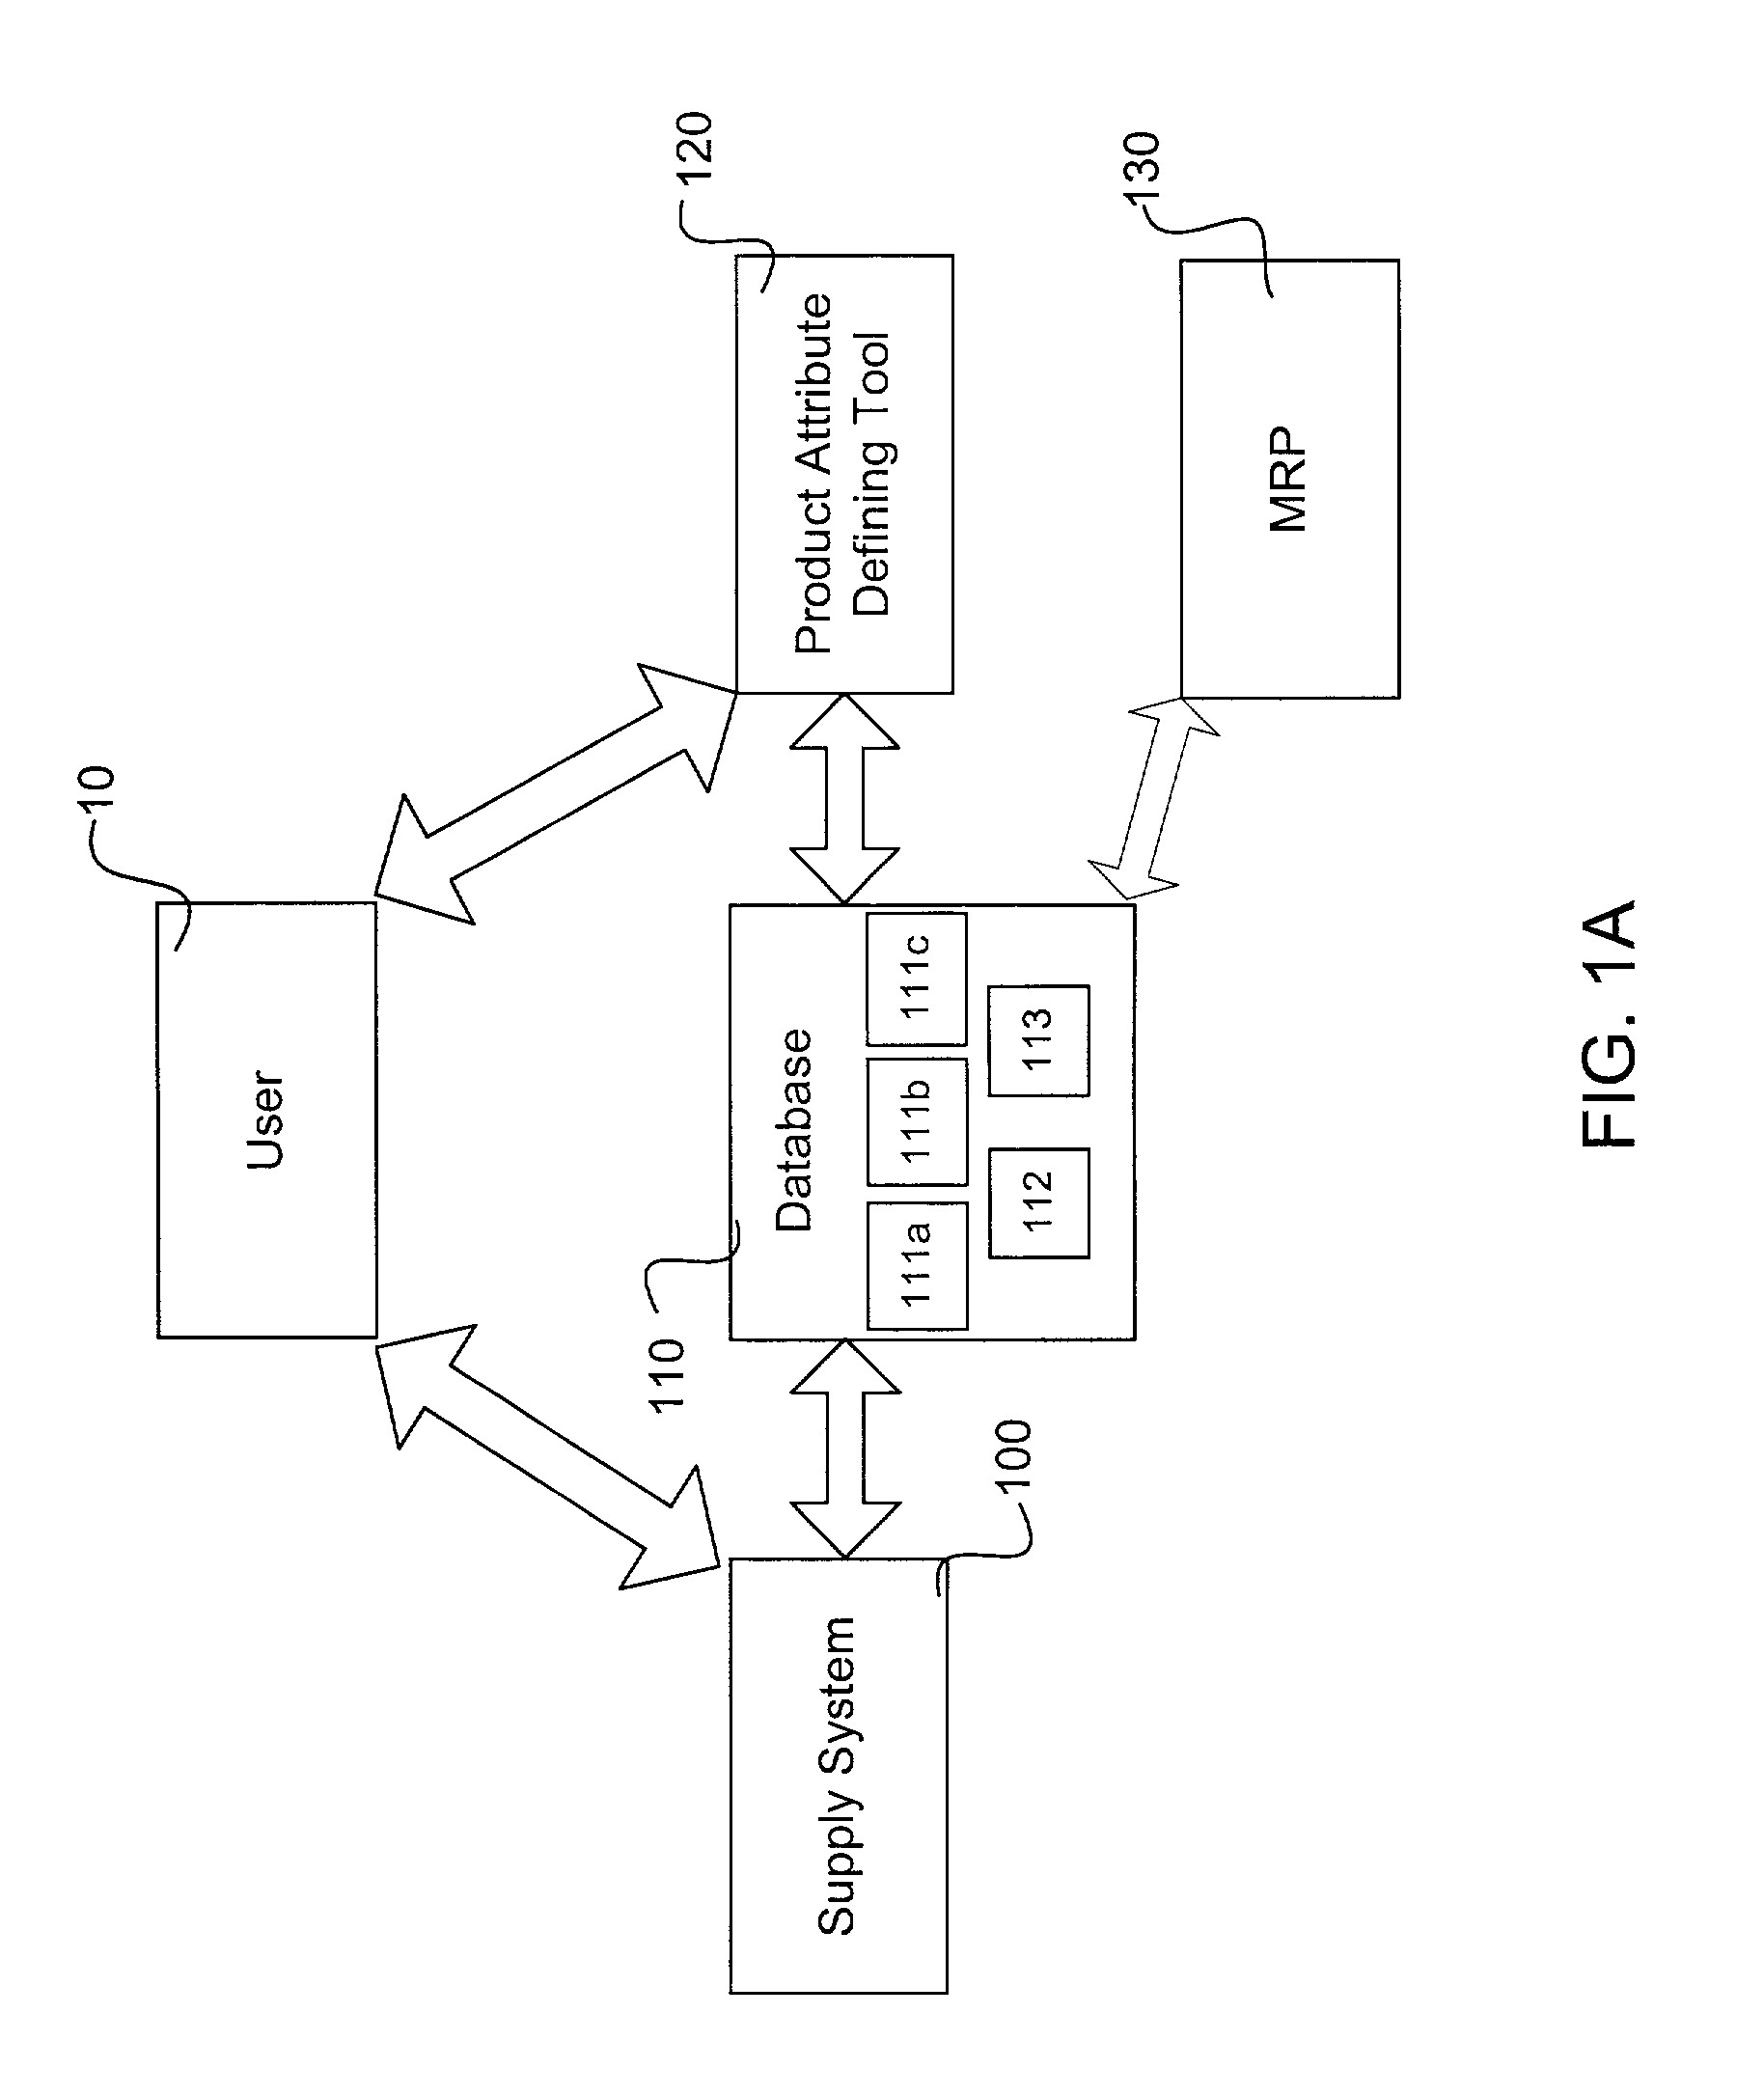 System and method for allocating the supply of critical material components and manufacturing capacity